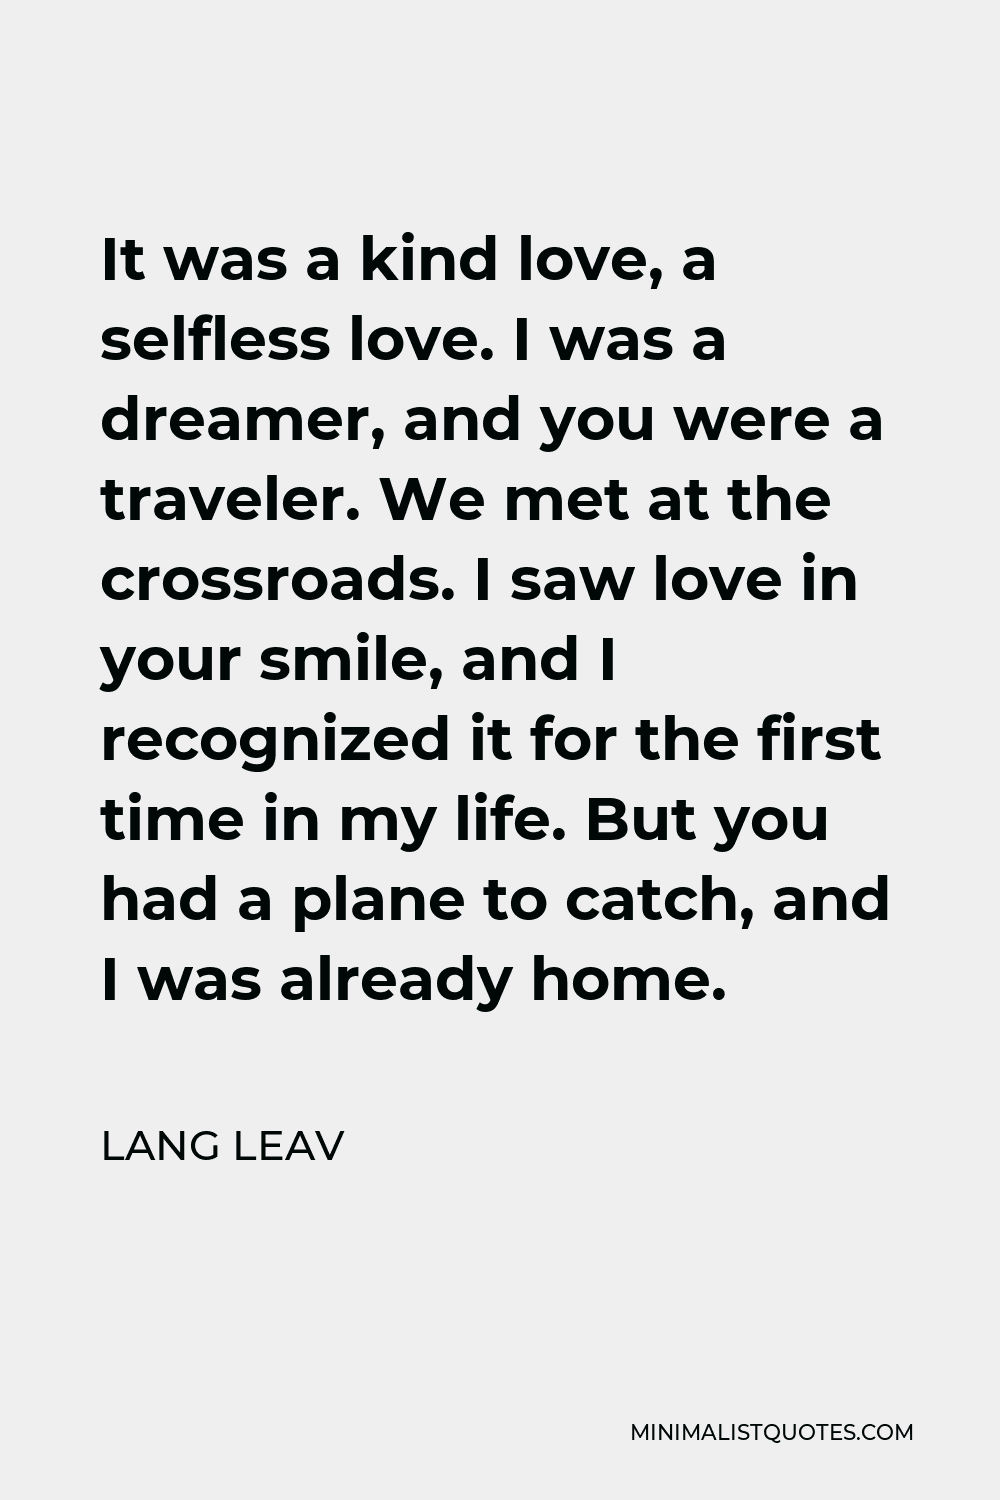 Lang Leav Quote - It was a kind love, a selfless love. I was a dreamer, and you were a traveler. We met at the crossroads. I saw love in your smile, and I recognized it for the first time in my life. But you had a plane to catch, and I was already home.